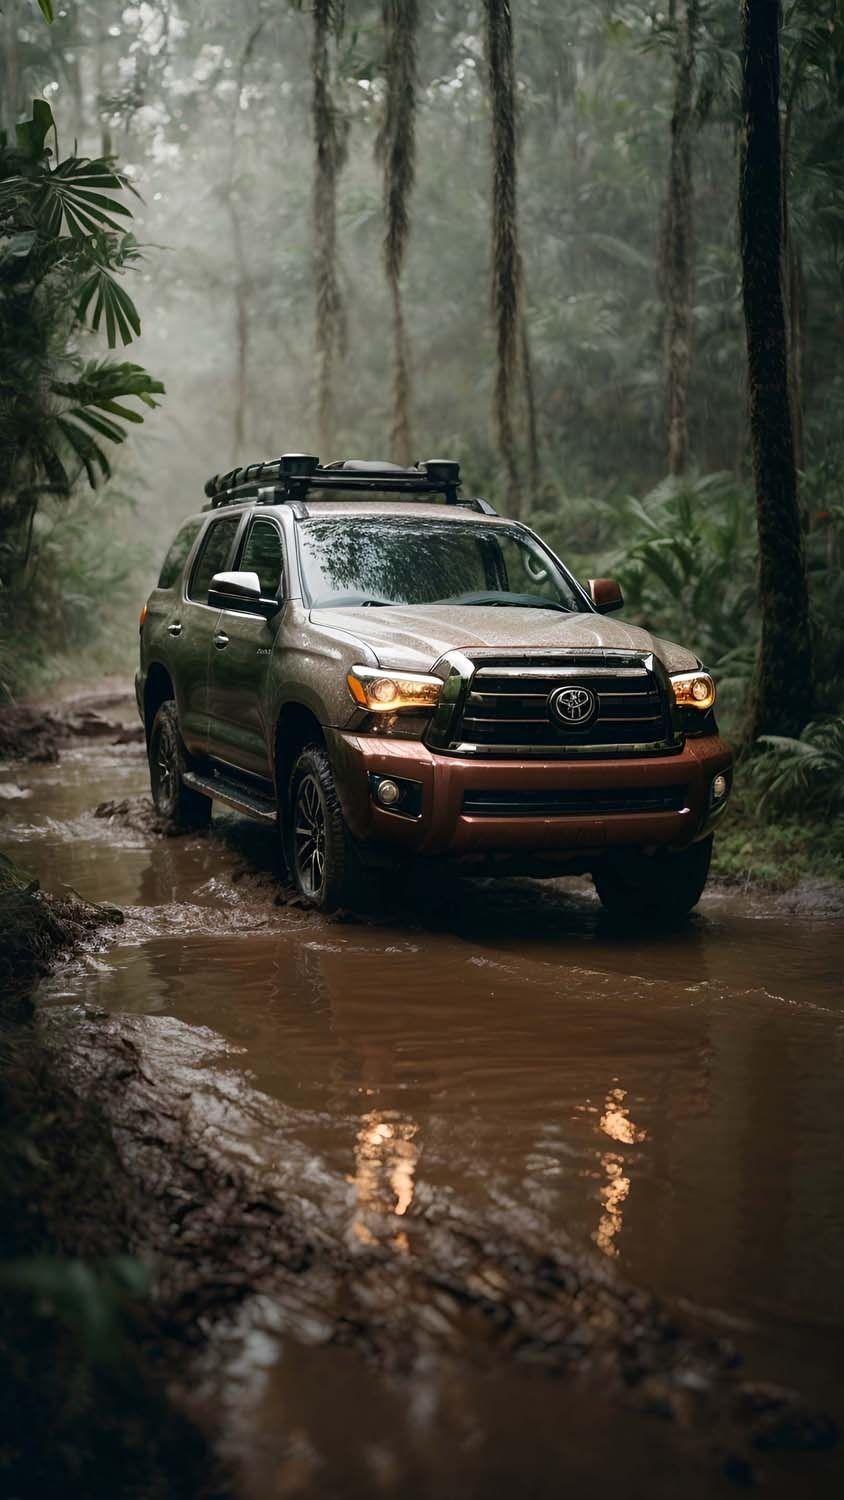 Toyota SUV iPhone Wallpaper 4K  iPhone Wallpapers